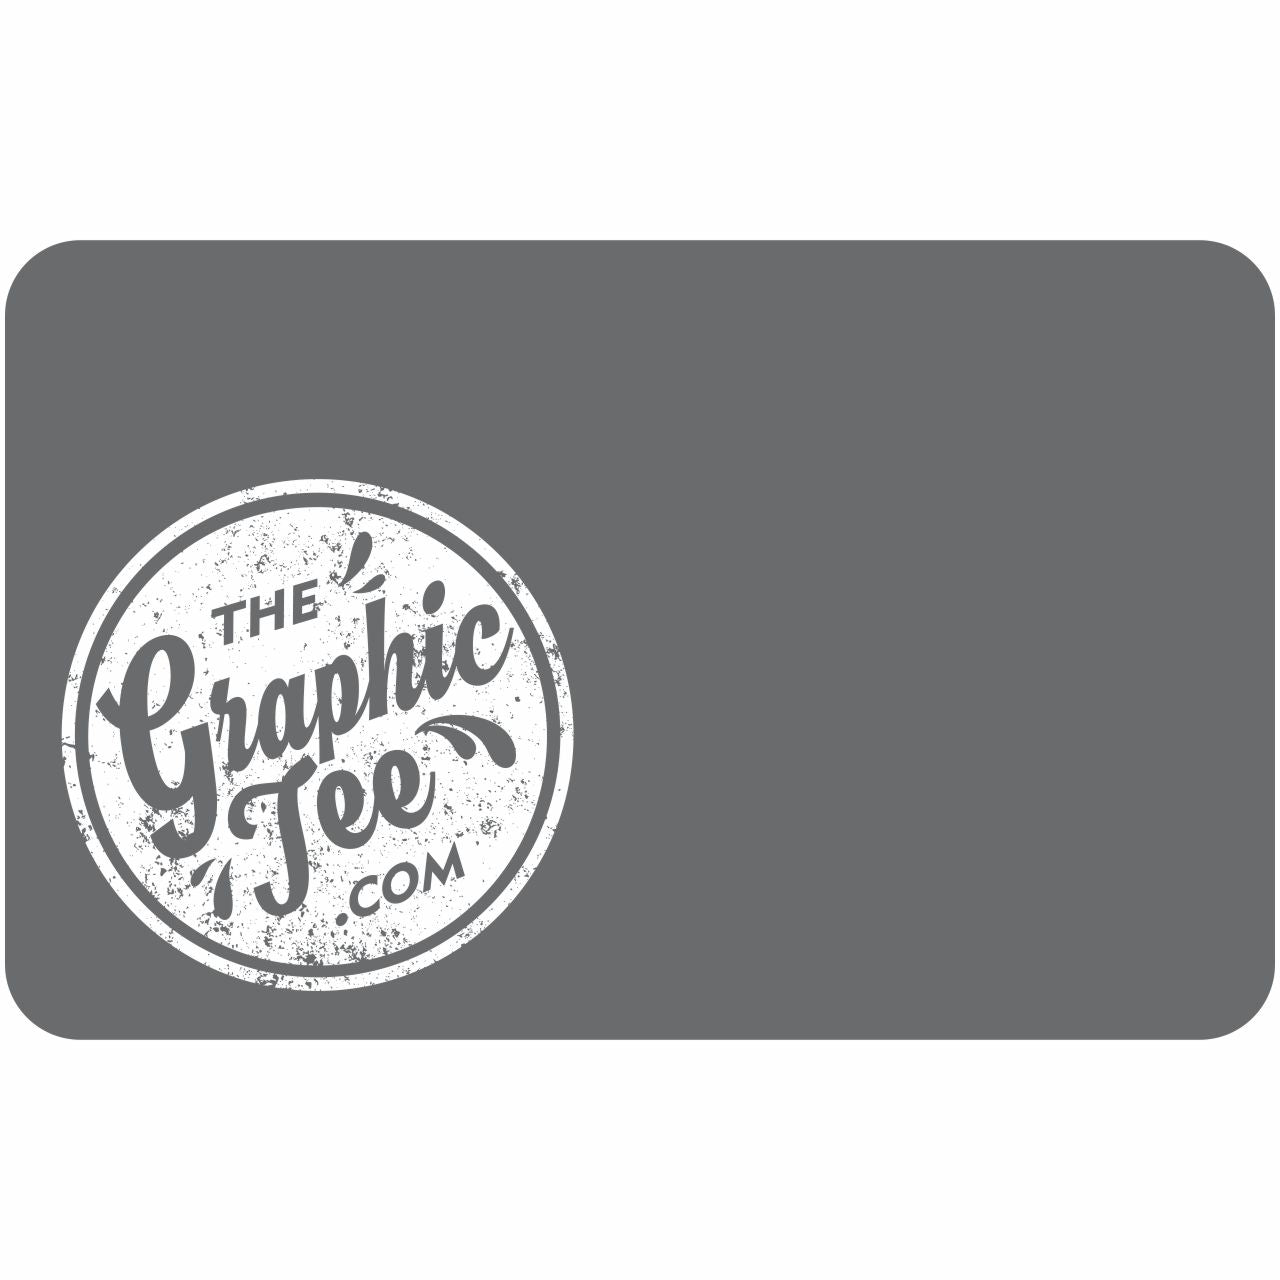 The Graphic Tee Gift Card - The Graphic Tee